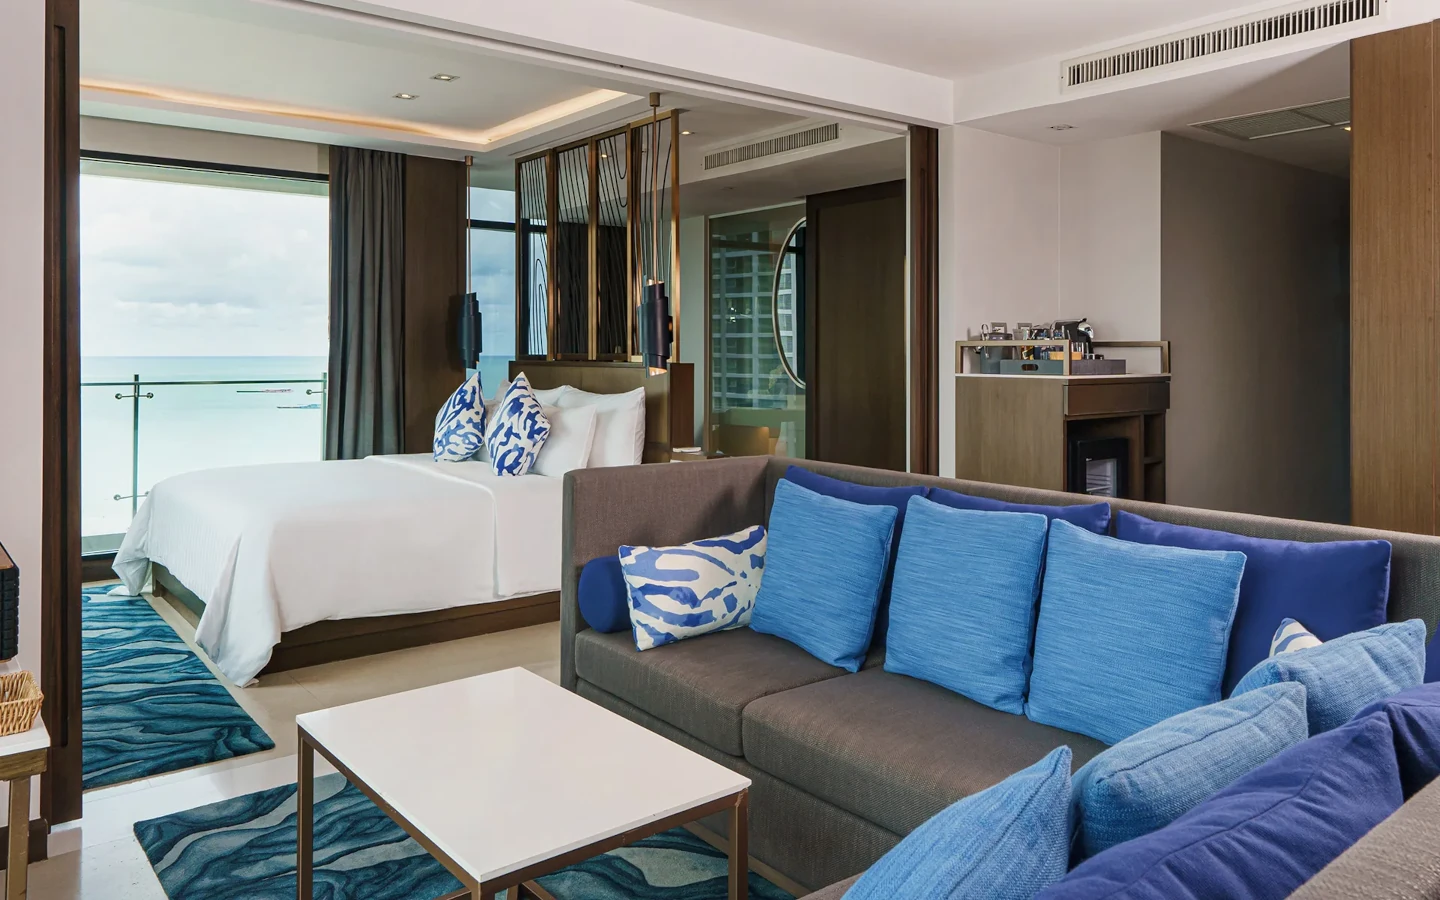 Marina suite and great sea view at the Mytt Hotel in Pattaya.